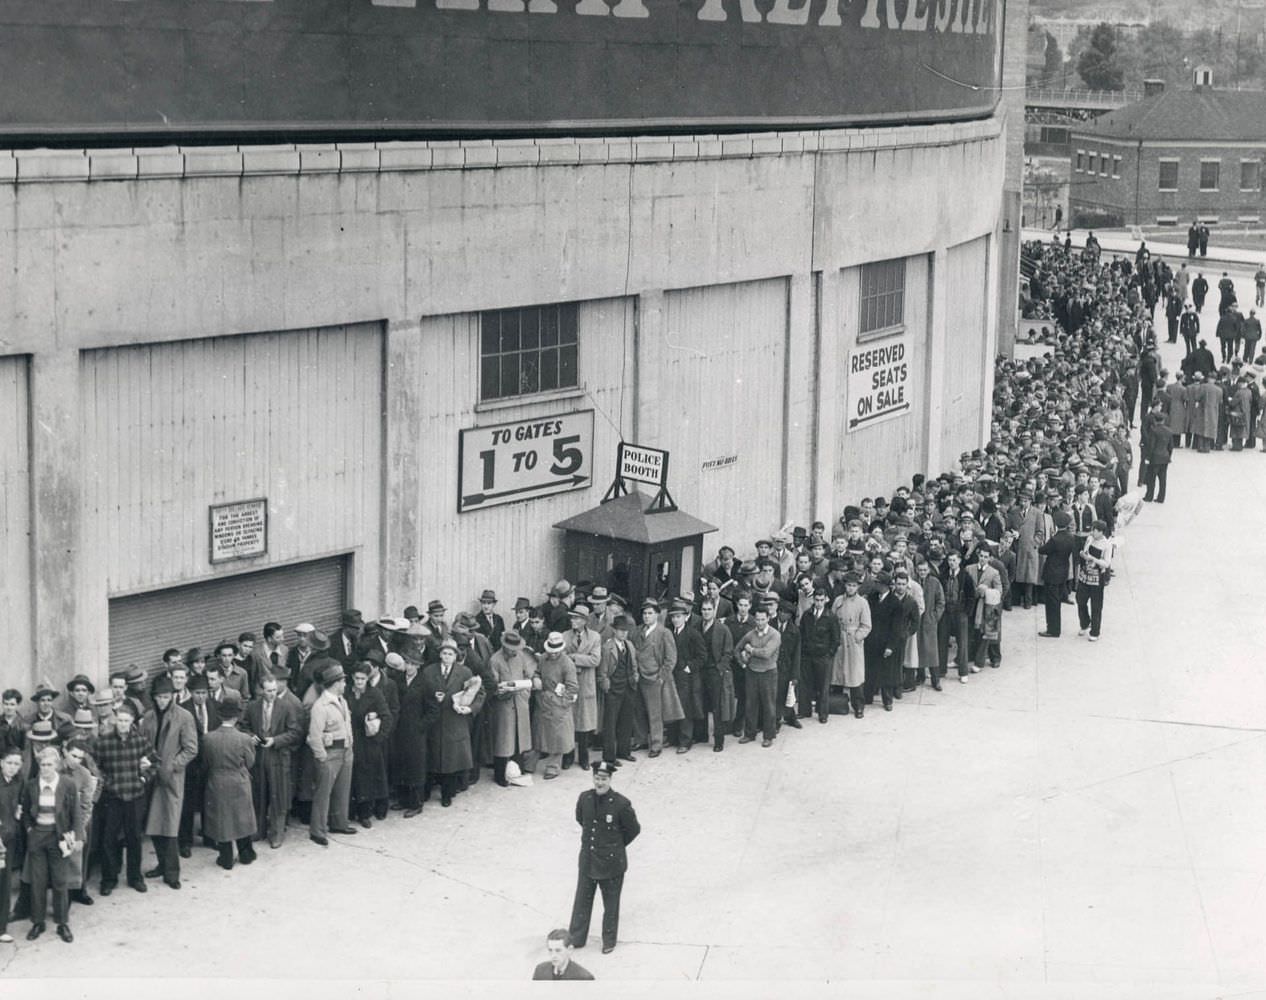 A long line forms for World Series tickets at Yankee Stadium circa 1940s in New York City.